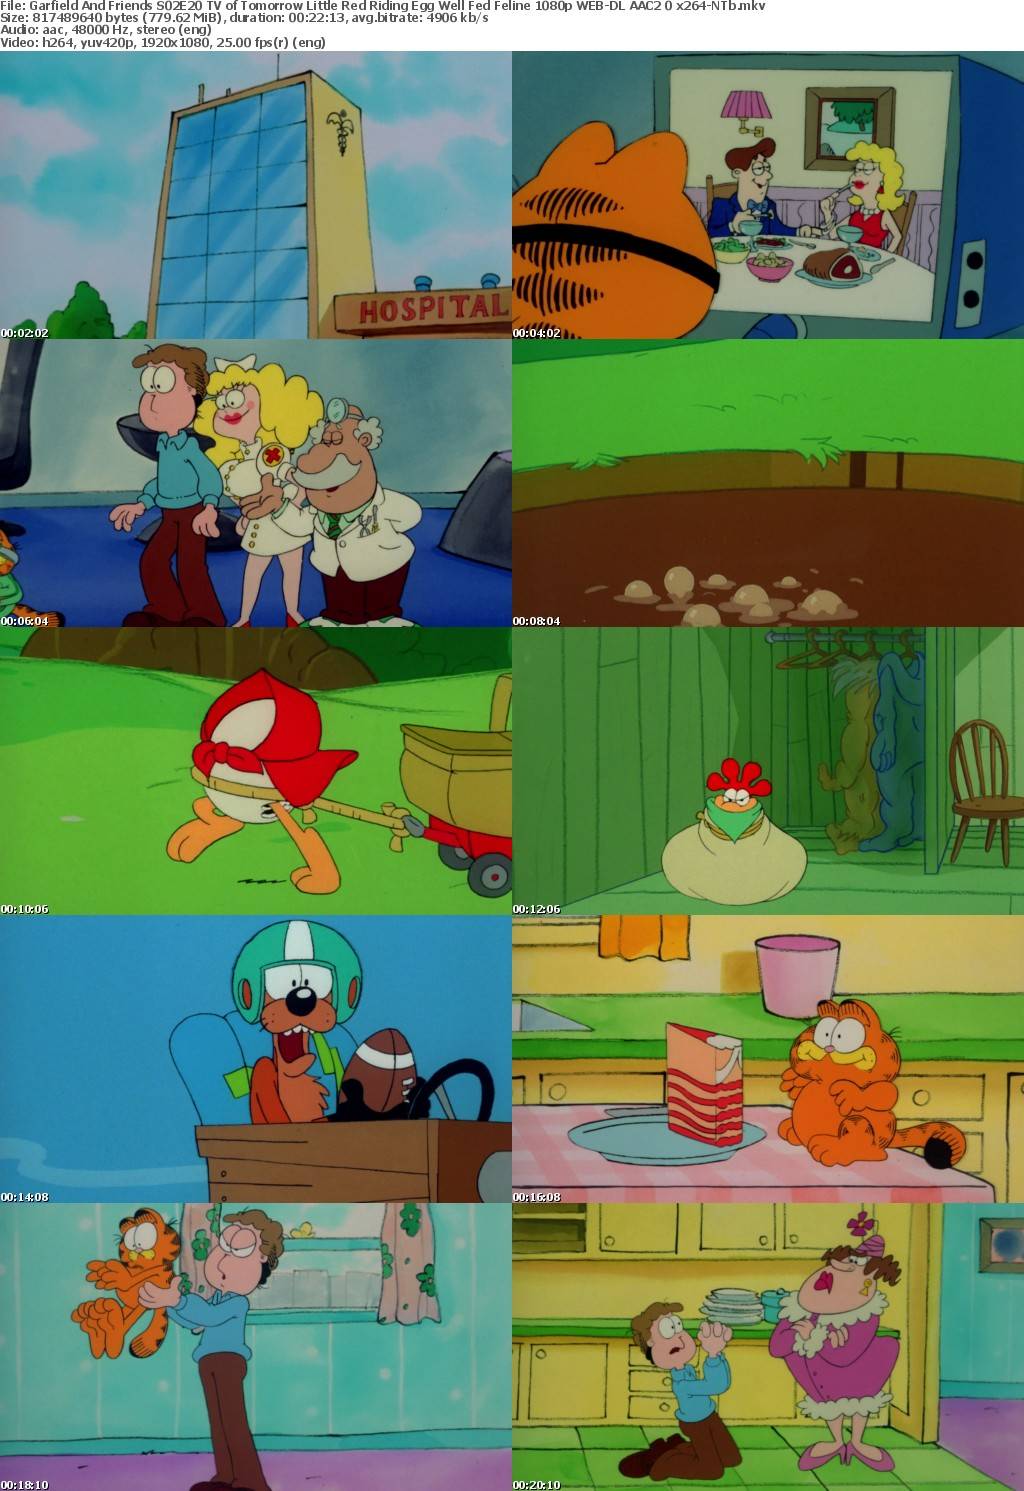 Garfield And Friends S02E20 TV of Tomorrow Little Red Riding Egg Well Fed Feline 1080p WEB-DL AAC2 0 x264-NTb